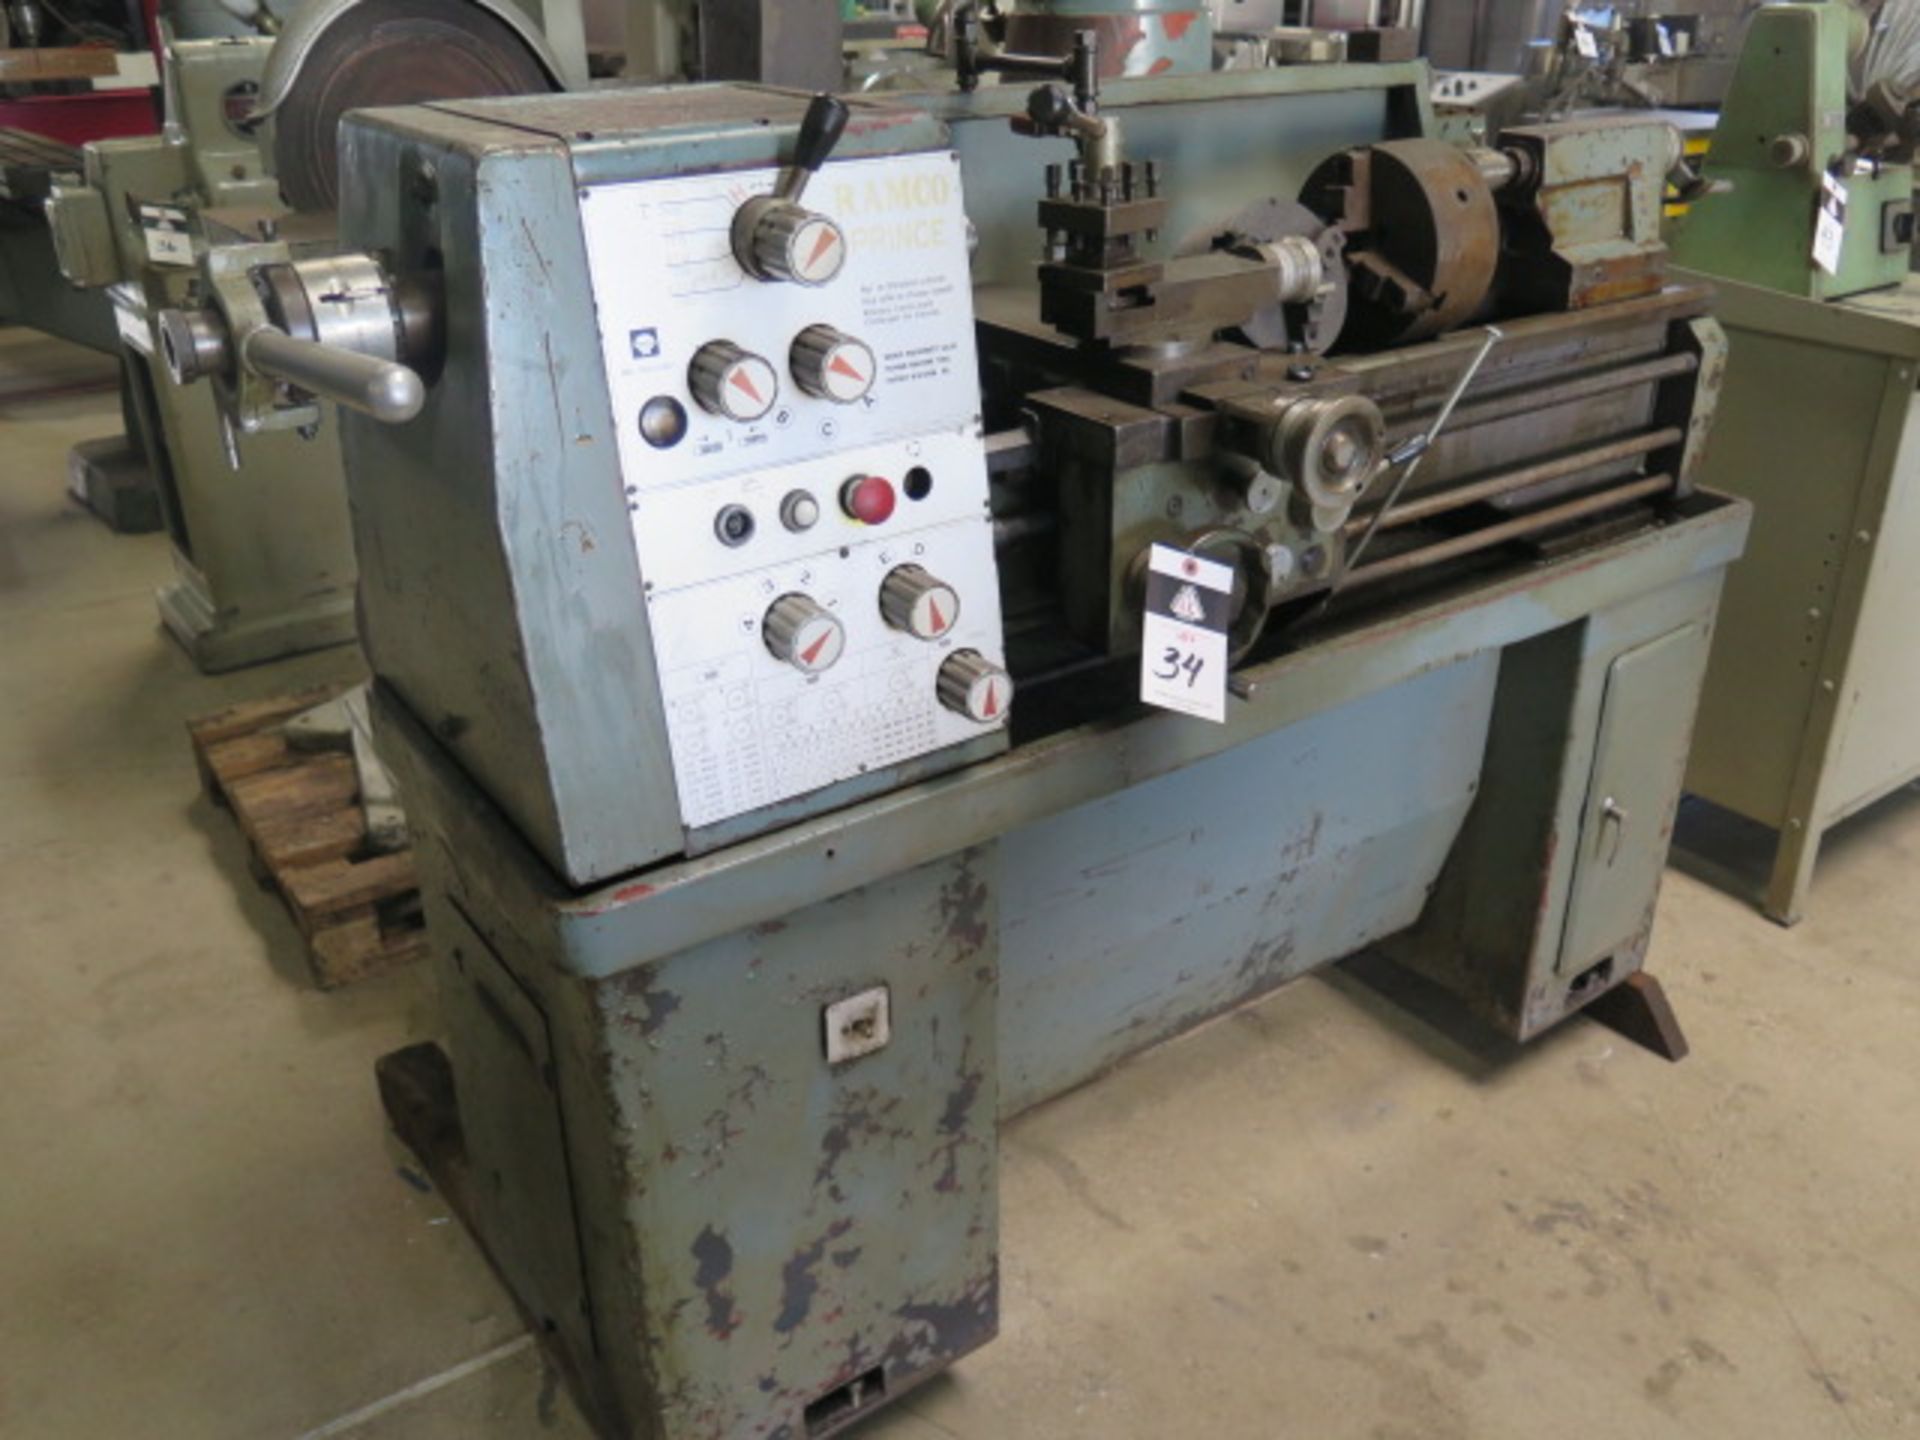 Ramco "Prince" 11" x 30" Geared Head Lathe s/n 4064 w/ 105-2000 RPM, Inch/mm Threading, Tailstock, - Image 2 of 17